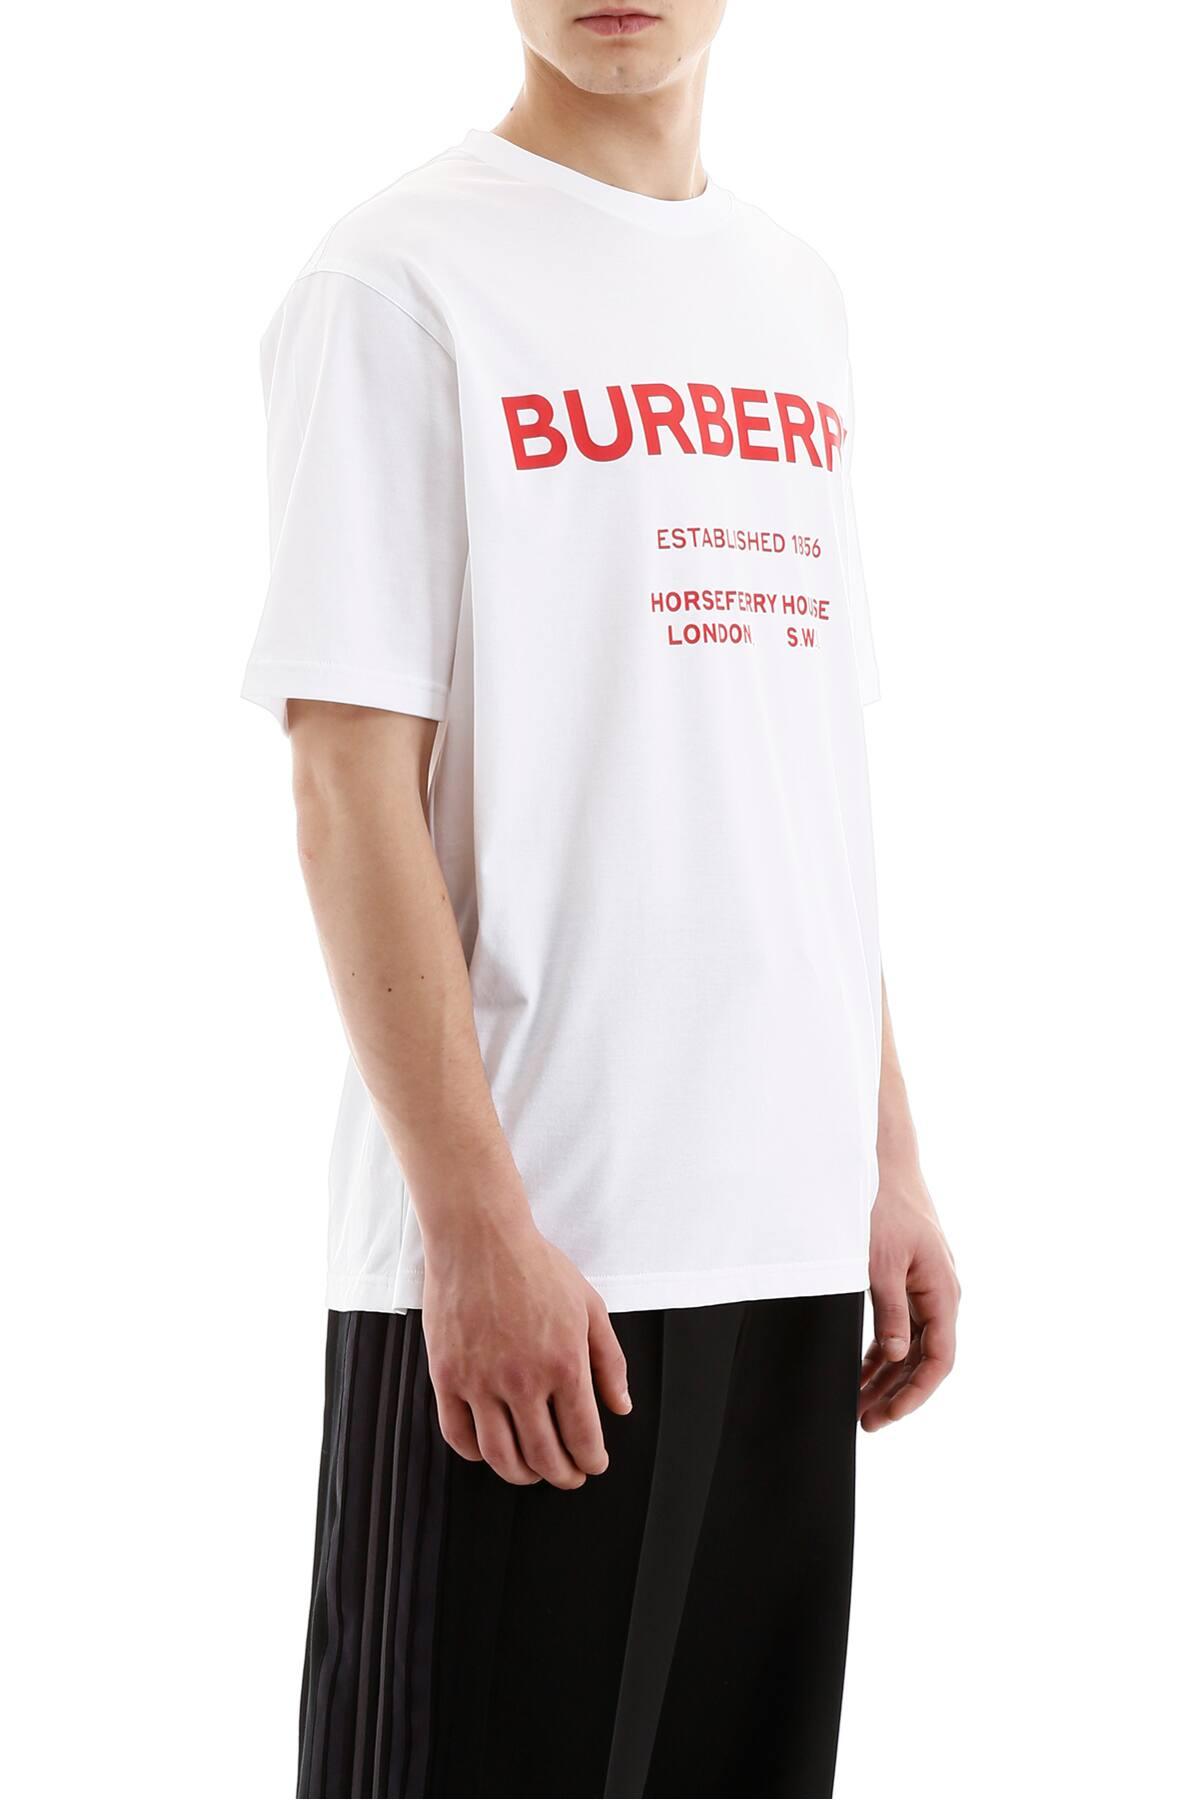 burberry white and red t shirt